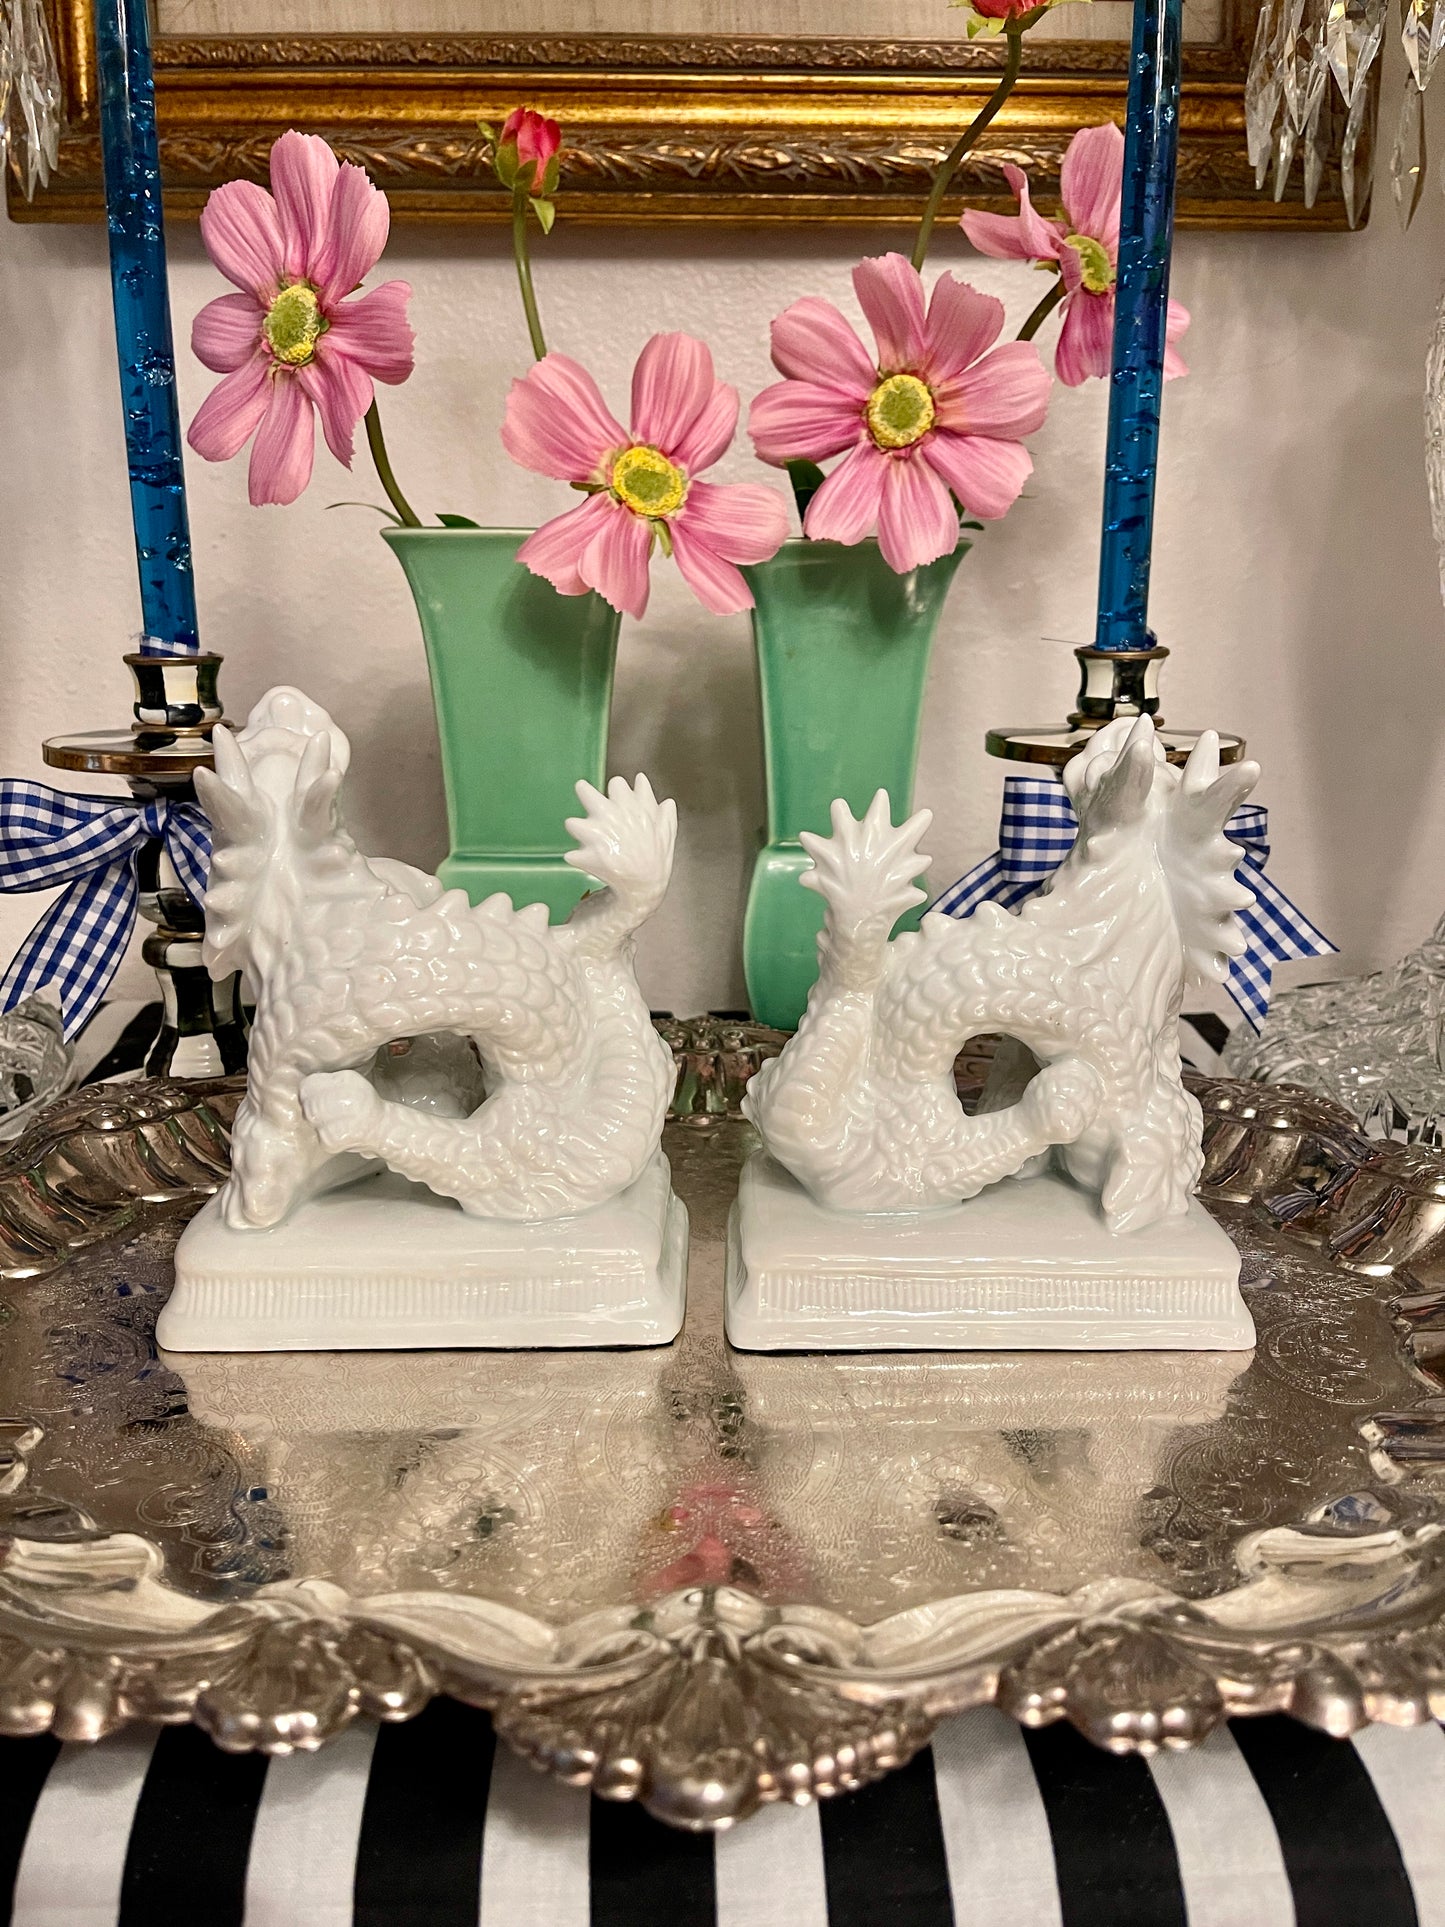 Vintage Fitz and Floyd Blanc de Chine Dragon Bookends, Chinoiserie Chic Shelf Decor